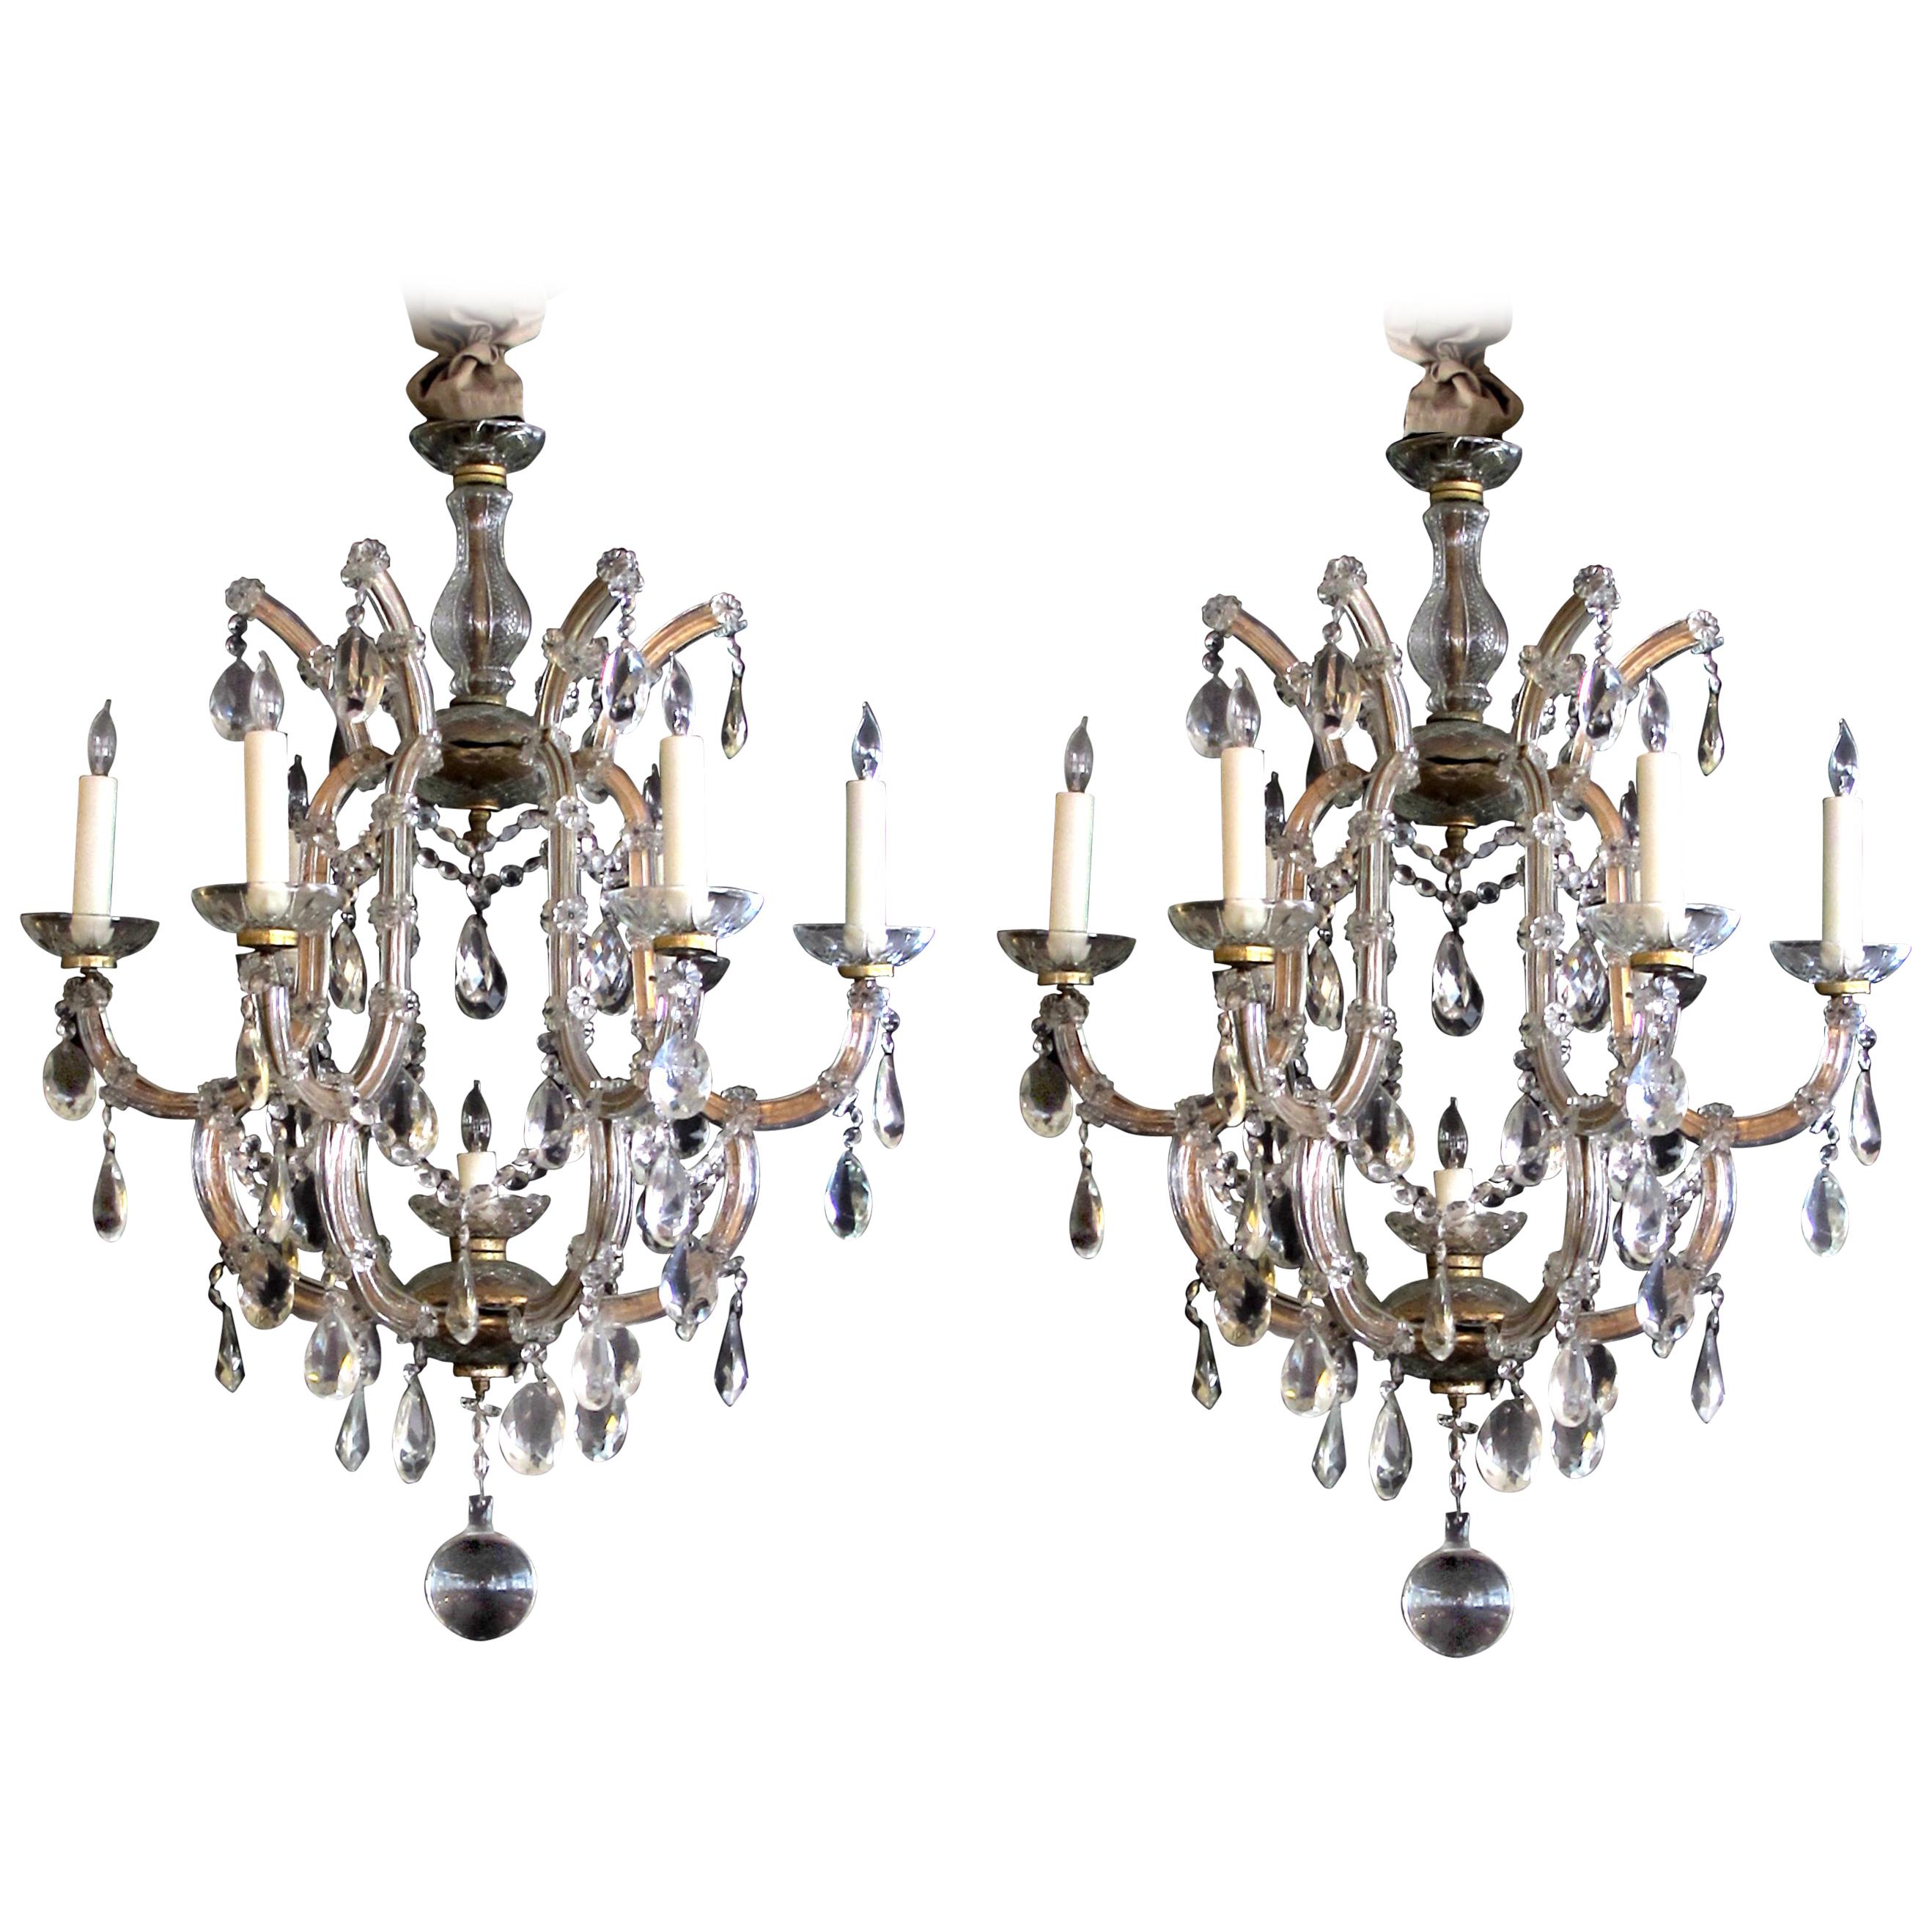 Good Pair of Continental Maria Theresa Basket-Form Glass & Crystal Chandeliers